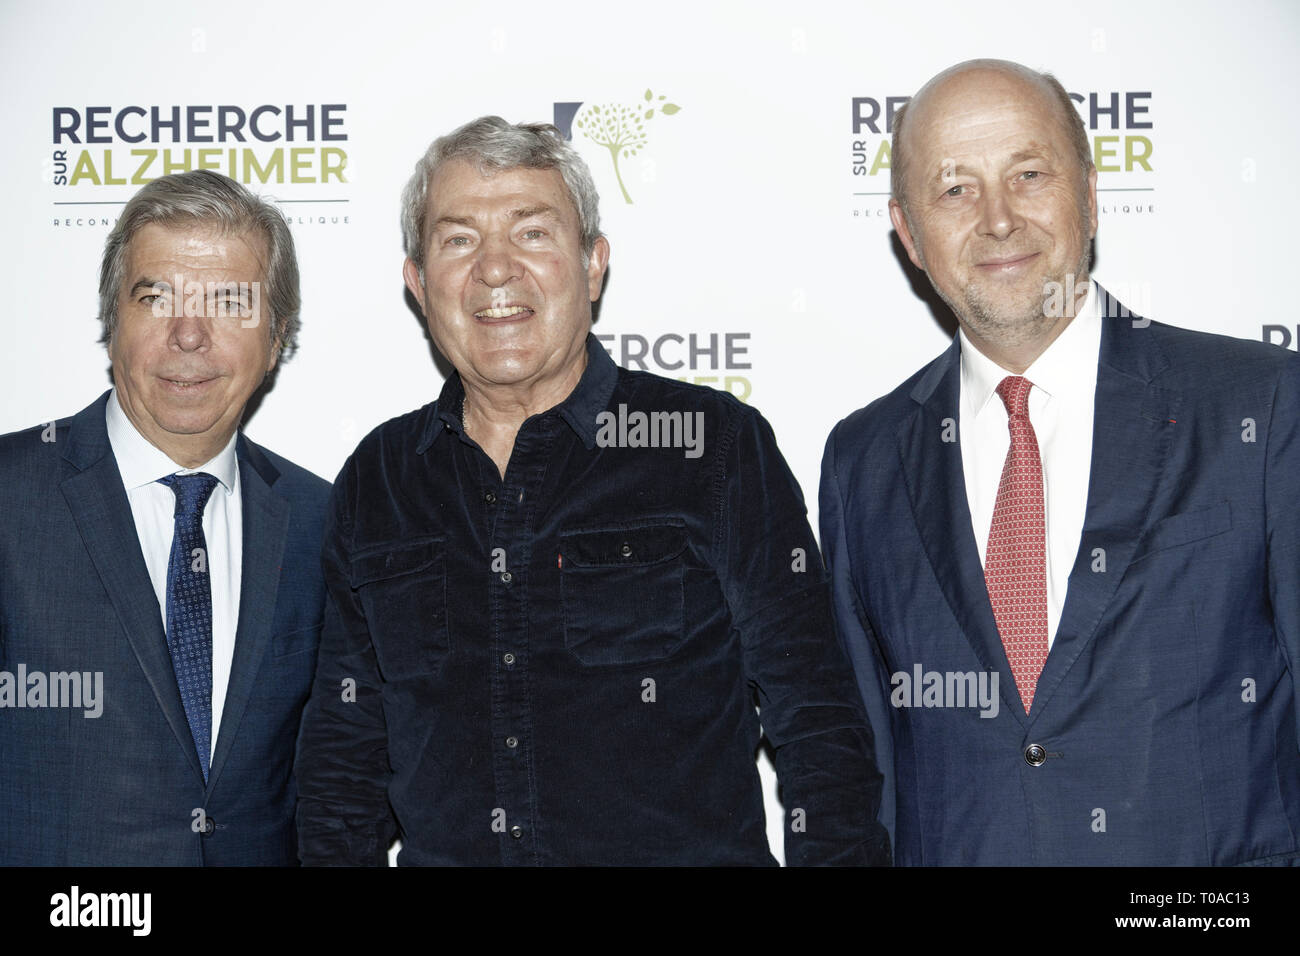 Paris, France. 18th Mar 2019. Pr Bruno Dubois (L), Martin Lamotte and Olivier De Ladoucette (R) - Photocall of the 14th Gala 2019 of the Association for Alzheimer Research at the Olympia in Paris on March 18, 2019 Credit: Véronique PHITOUSSI/Alamy Live News Stock Photo